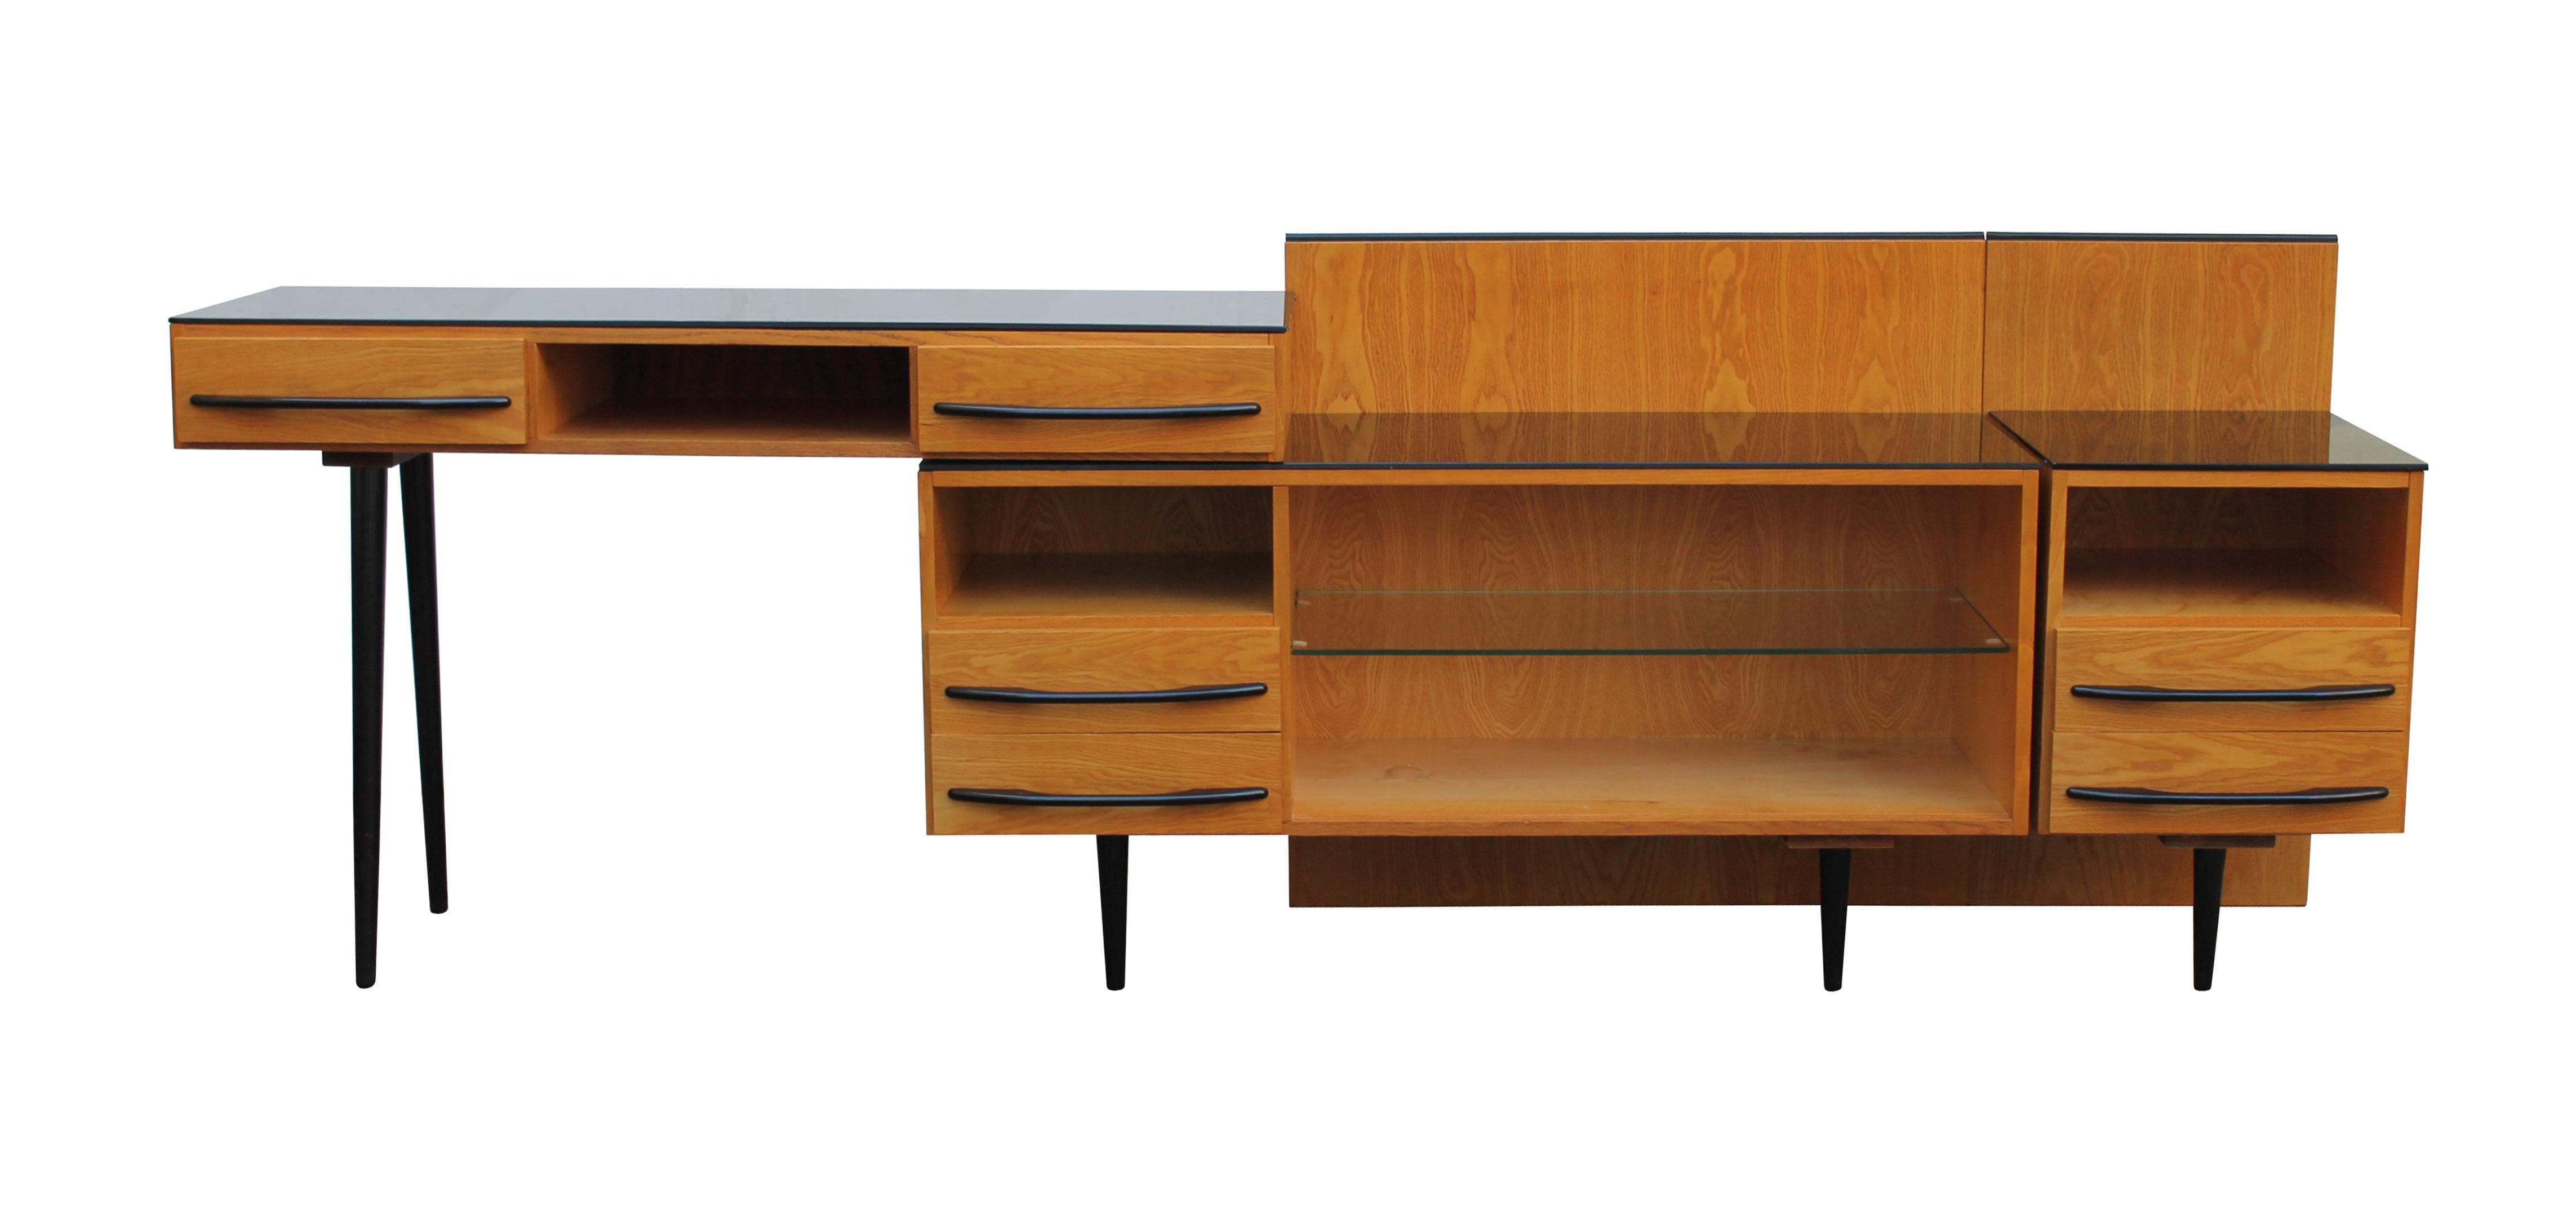 This Mid-Century Modern Modular Set was designed by Mojmir Pozar and produced by UP Zavody, Bucovice factory in 1960s Czechoslovakia.

This is a Modular set that consists of a writing desk, cabinet, side table and two headboards for the double